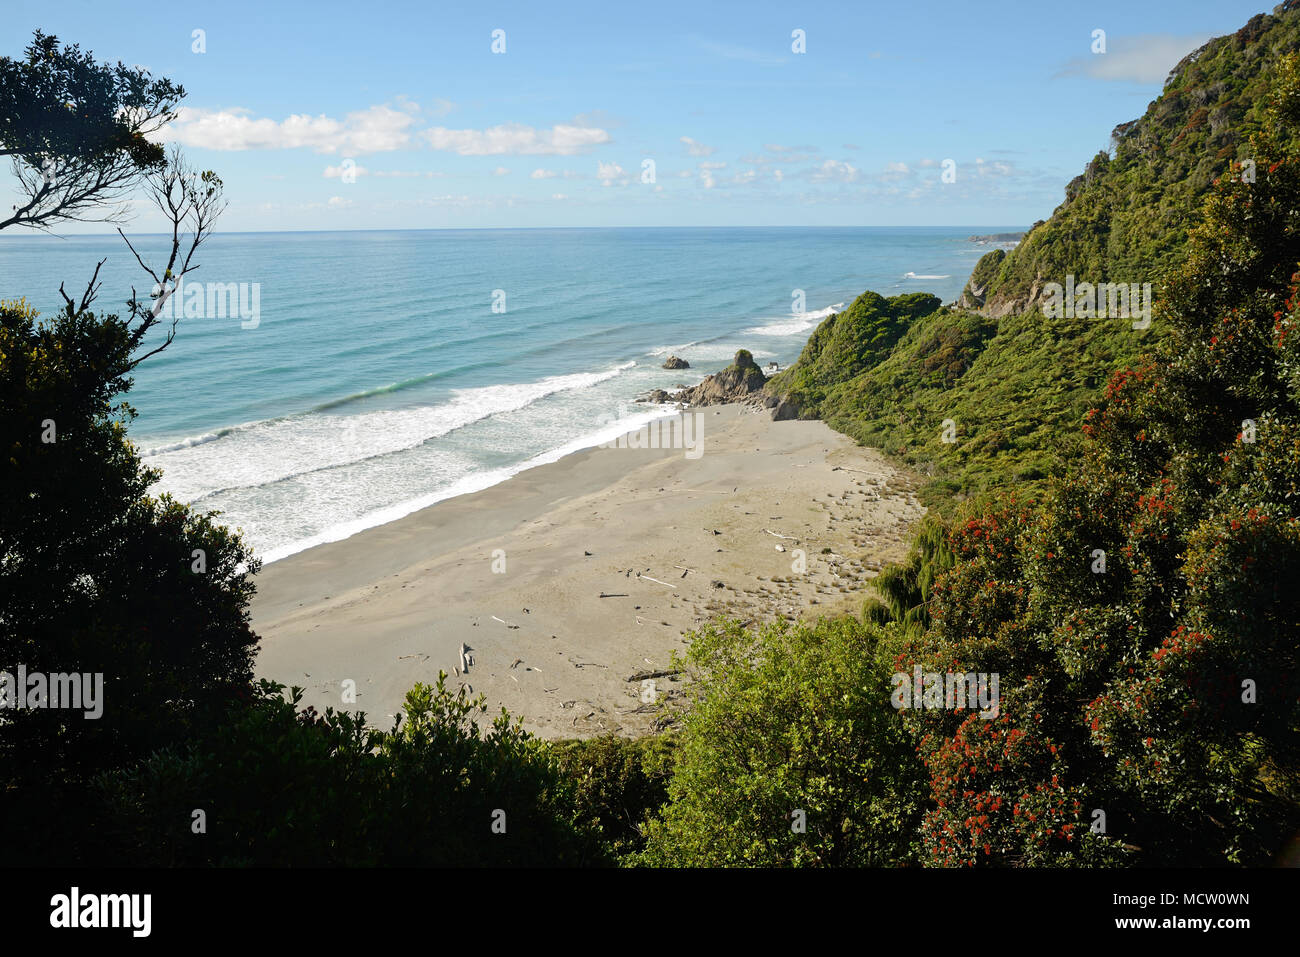 A view from the Coast Road on New Zealand's West Coast north of Greymouth, rated as one of the top ten scenic routes in the world. Stock Photo